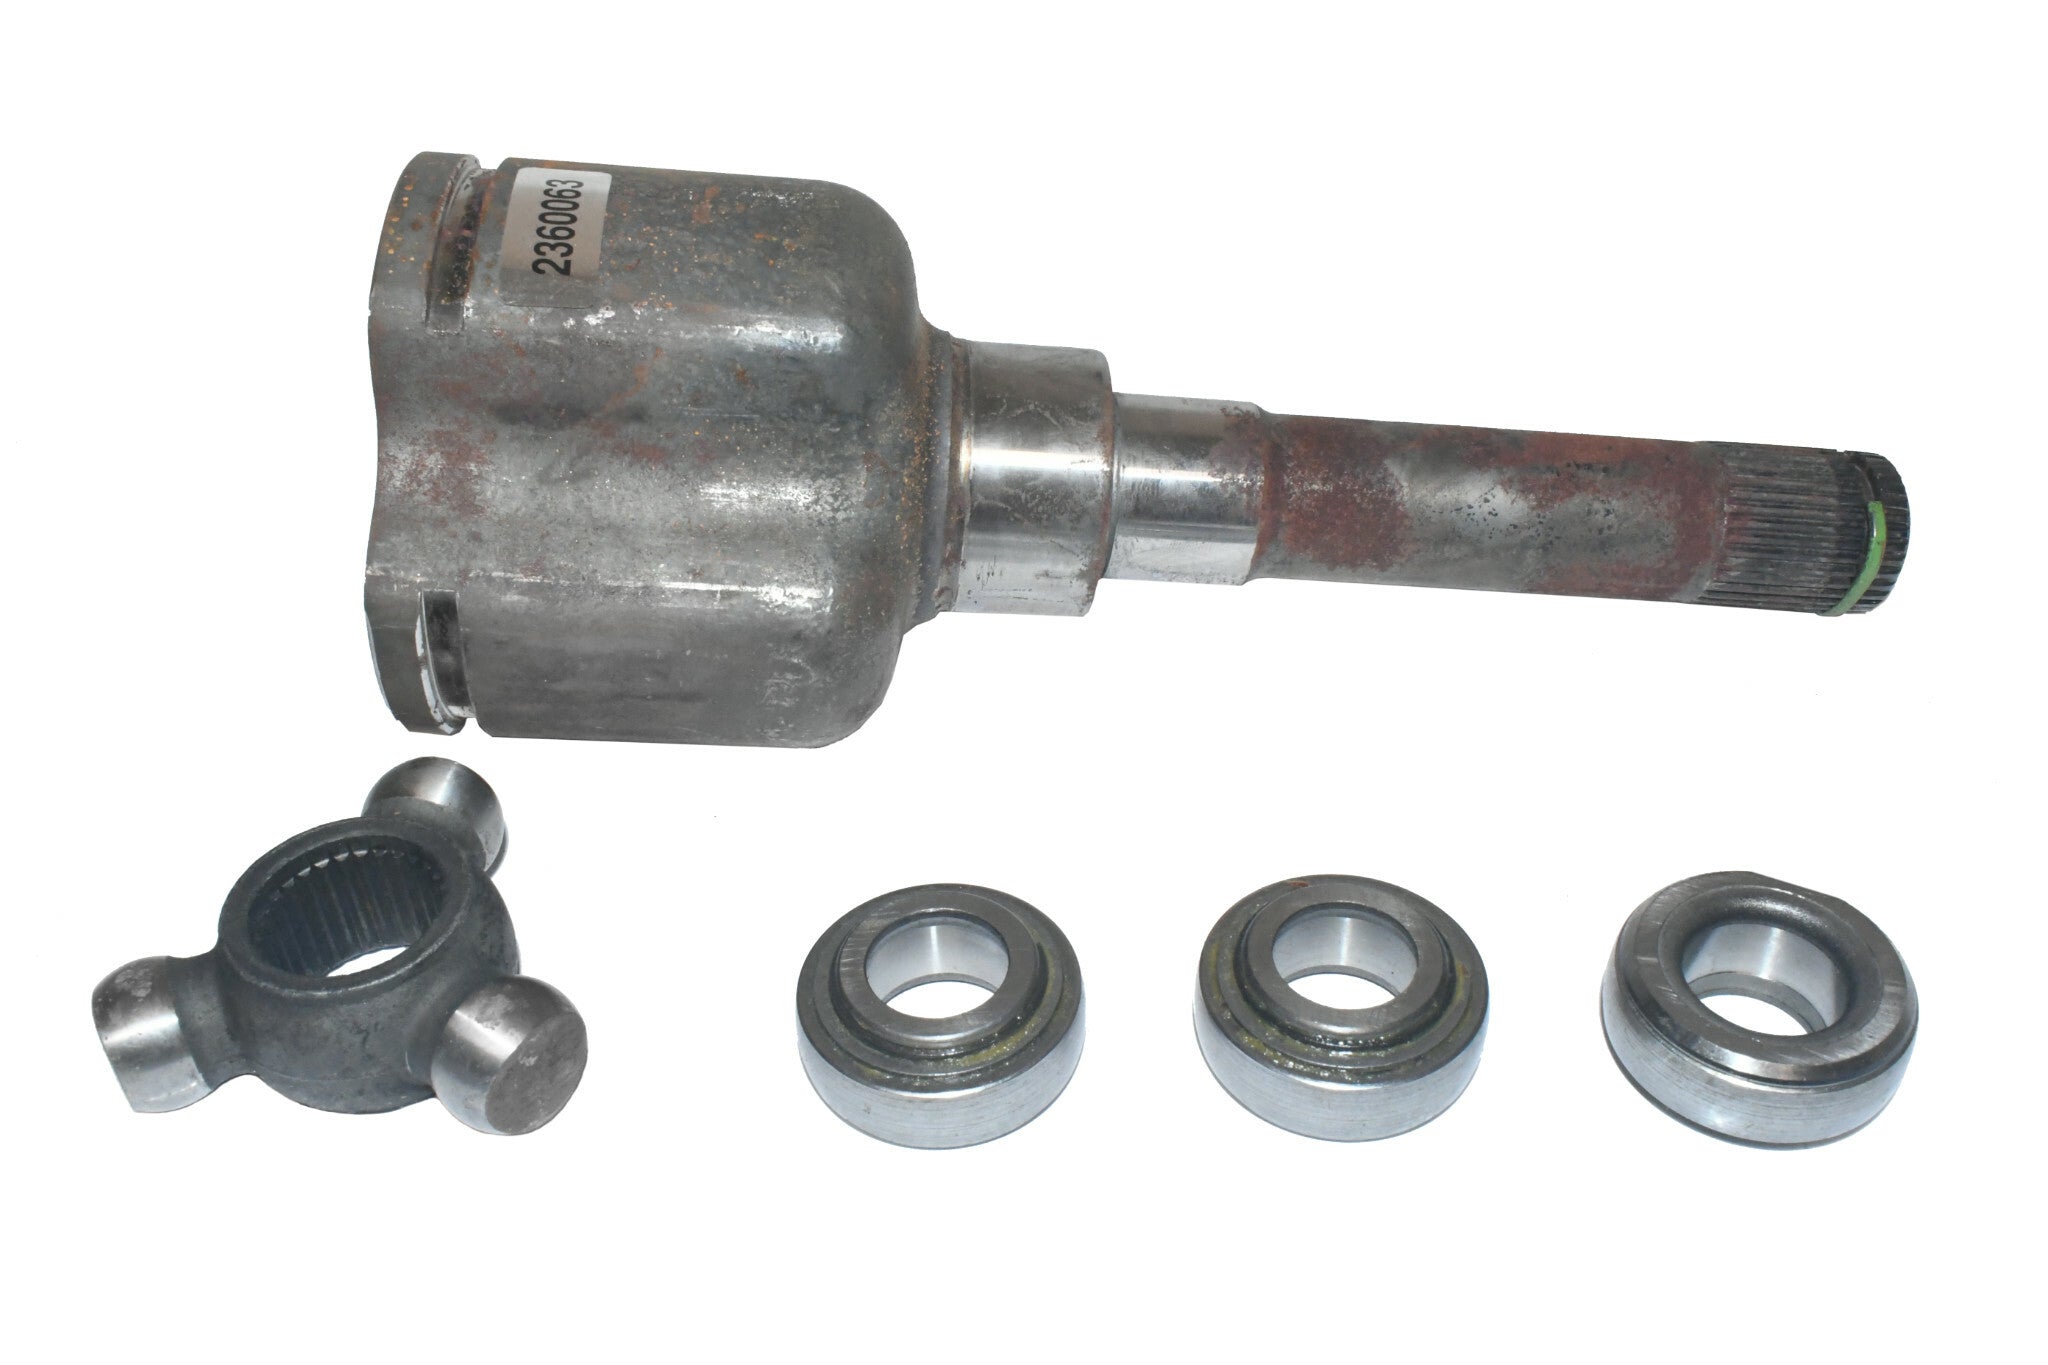 New front left inner CV joint for Contour, Cougar, Mystique from Ford TX-242 F5RZ-3B414-B